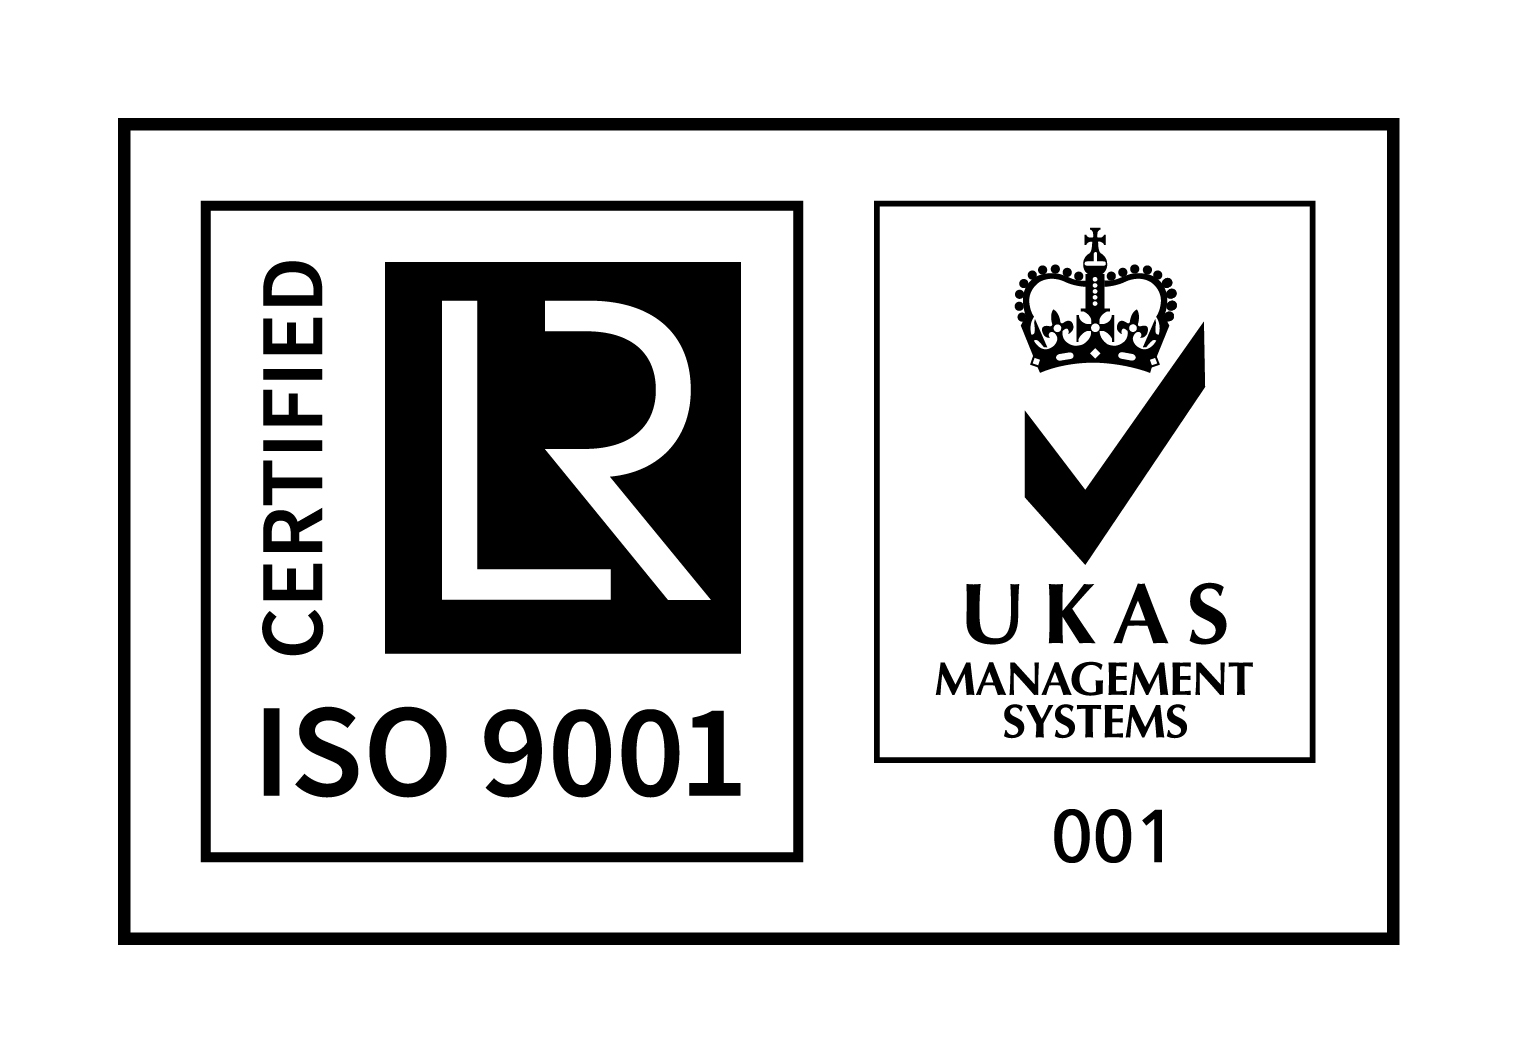 ISO 9001 - UKAS Management Systems